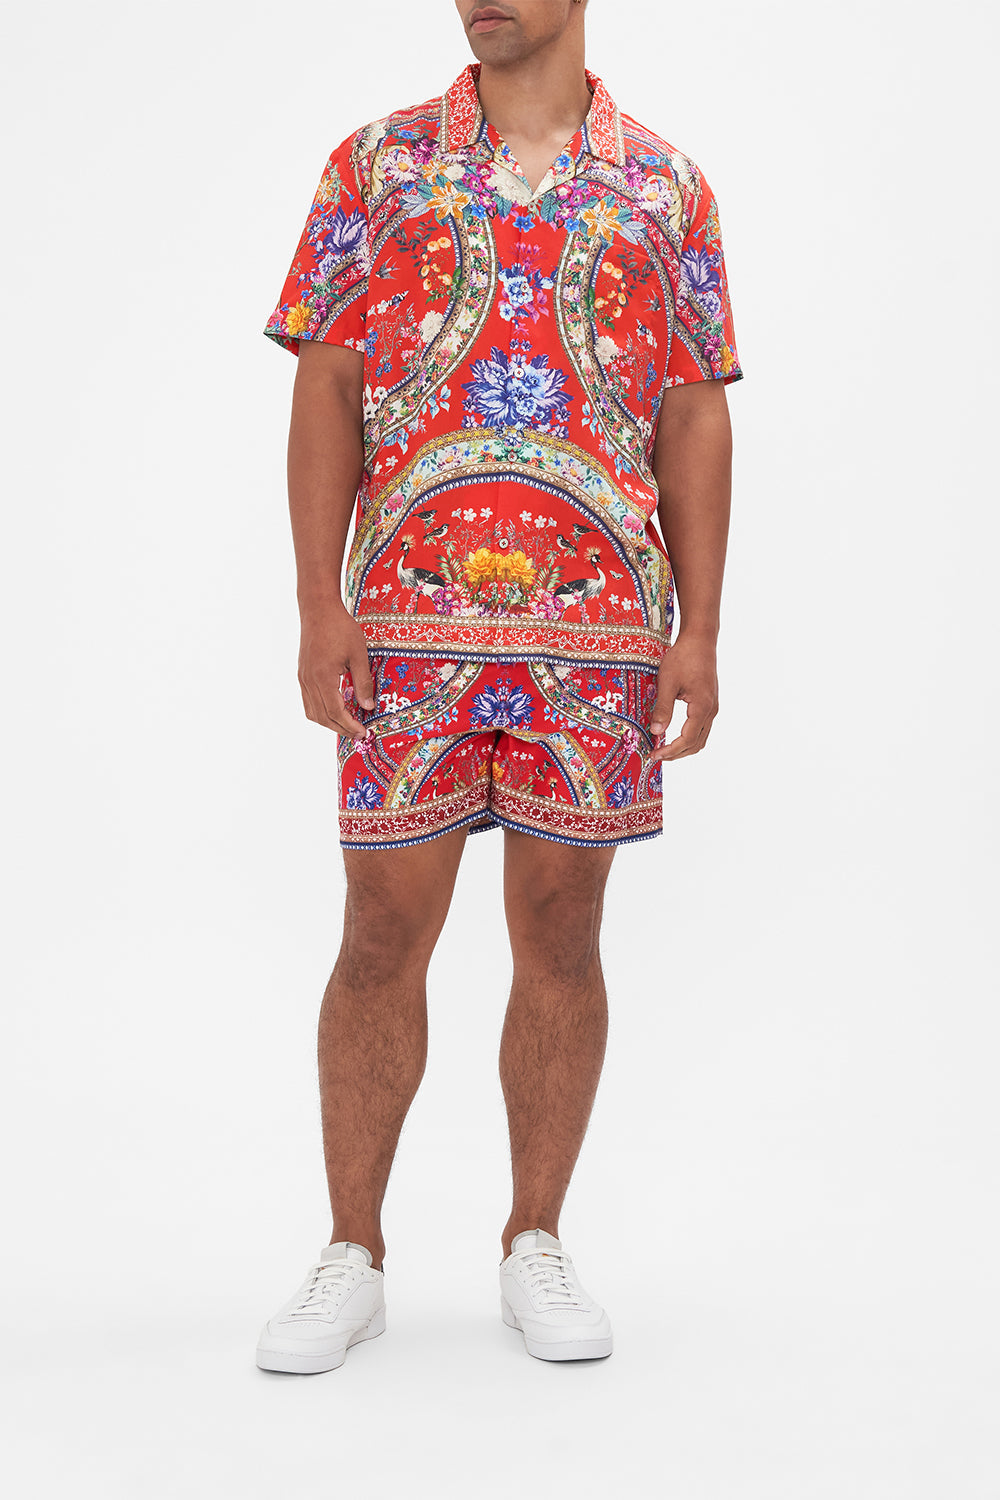 Hotel Franks By CAMILLA mens floral print camp collared shirt in The Summer Palace print